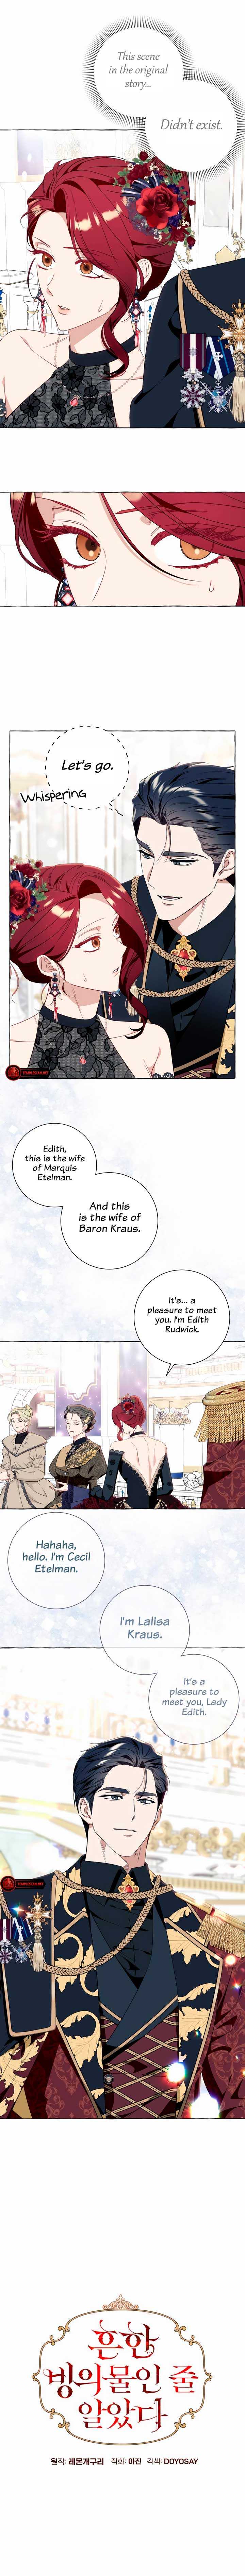 I Thought It Was A Common Isekai Story - Page 2